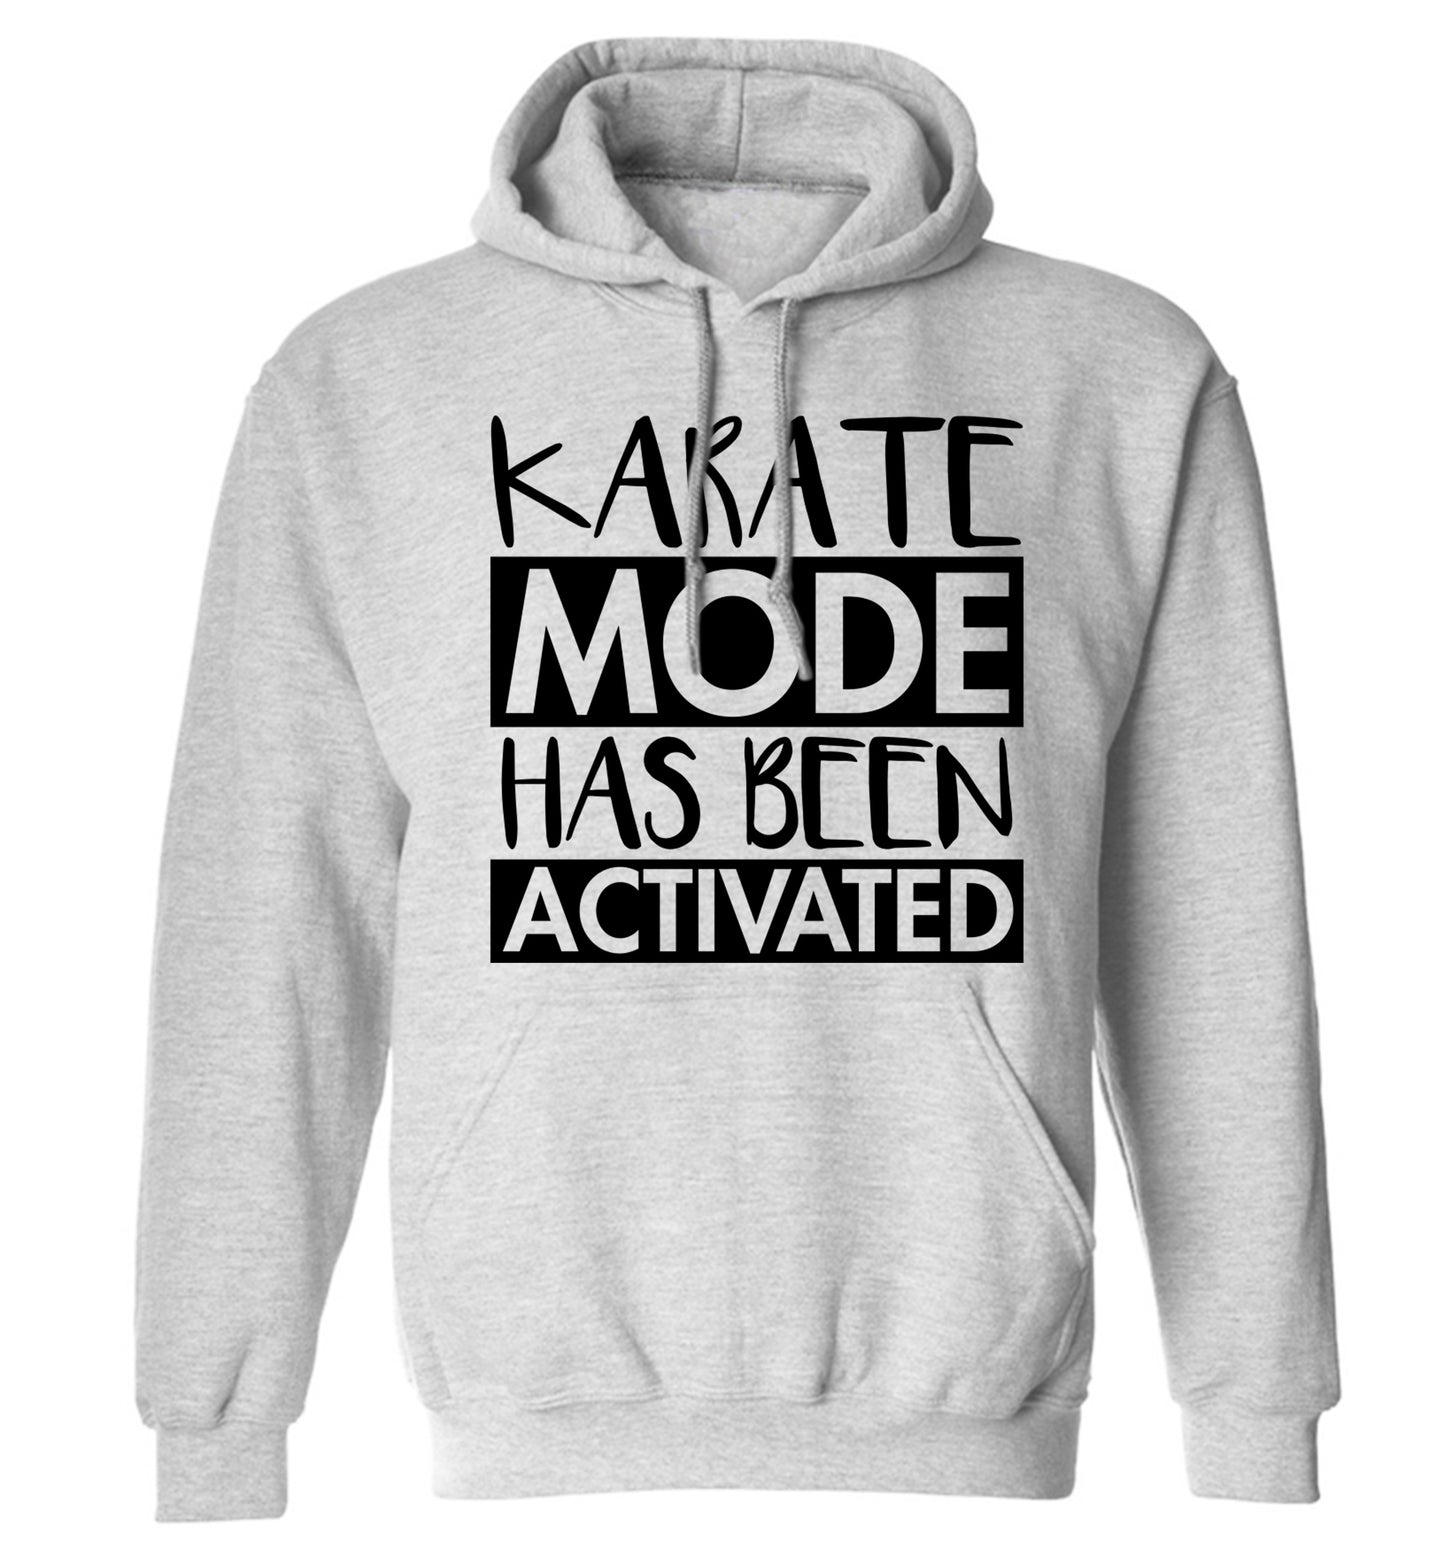 Karate mode activated adults unisex grey hoodie 2XL